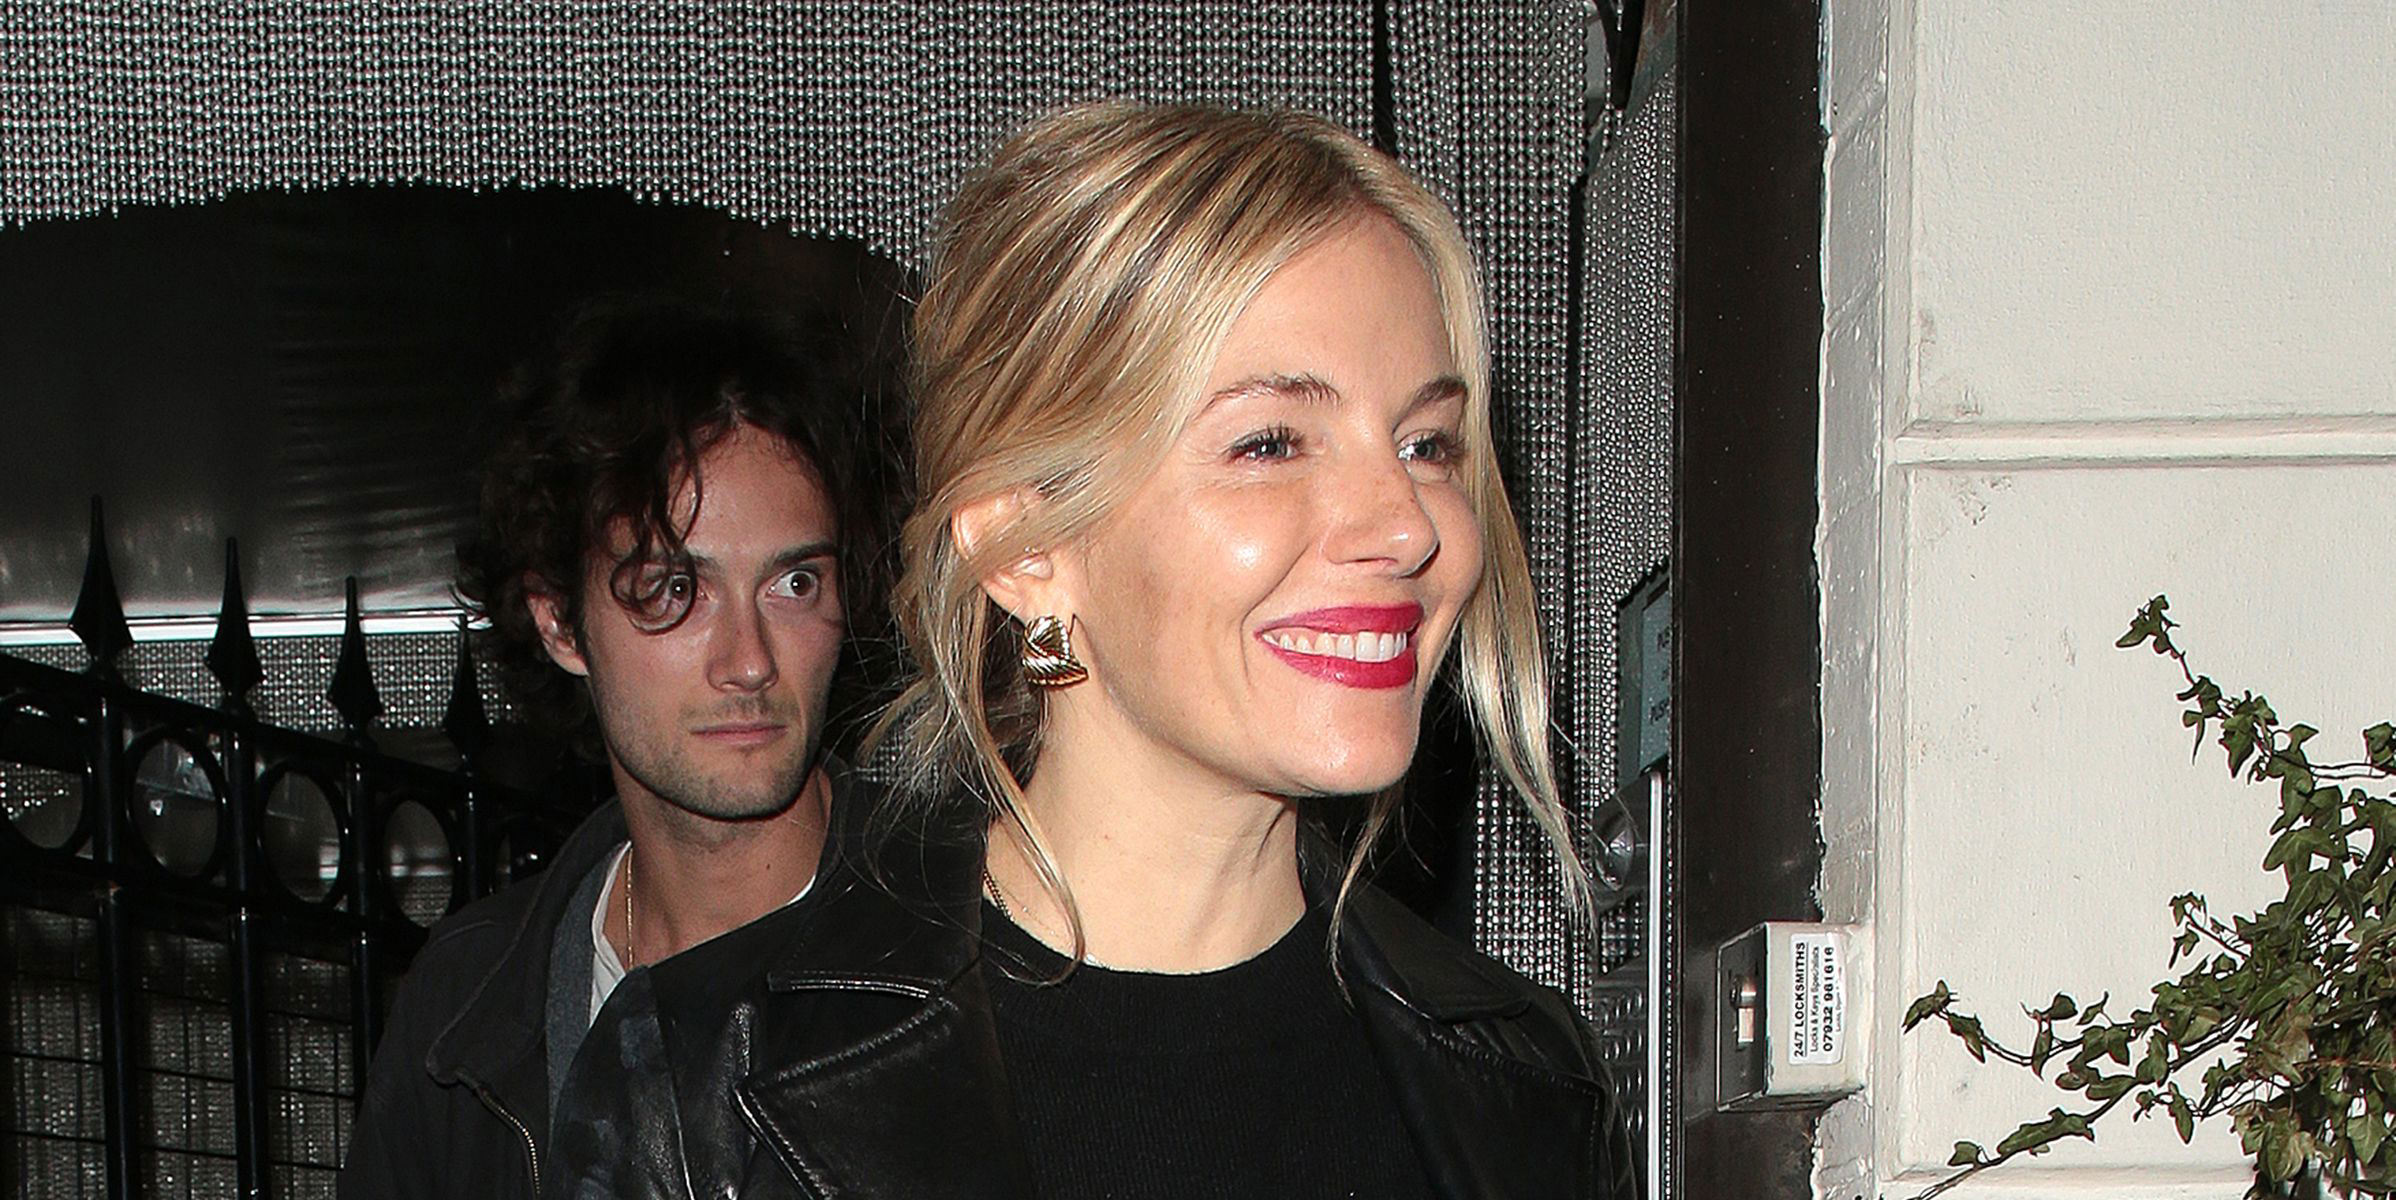 Sienna Miller's Missoma earrings are on every A-lister this season